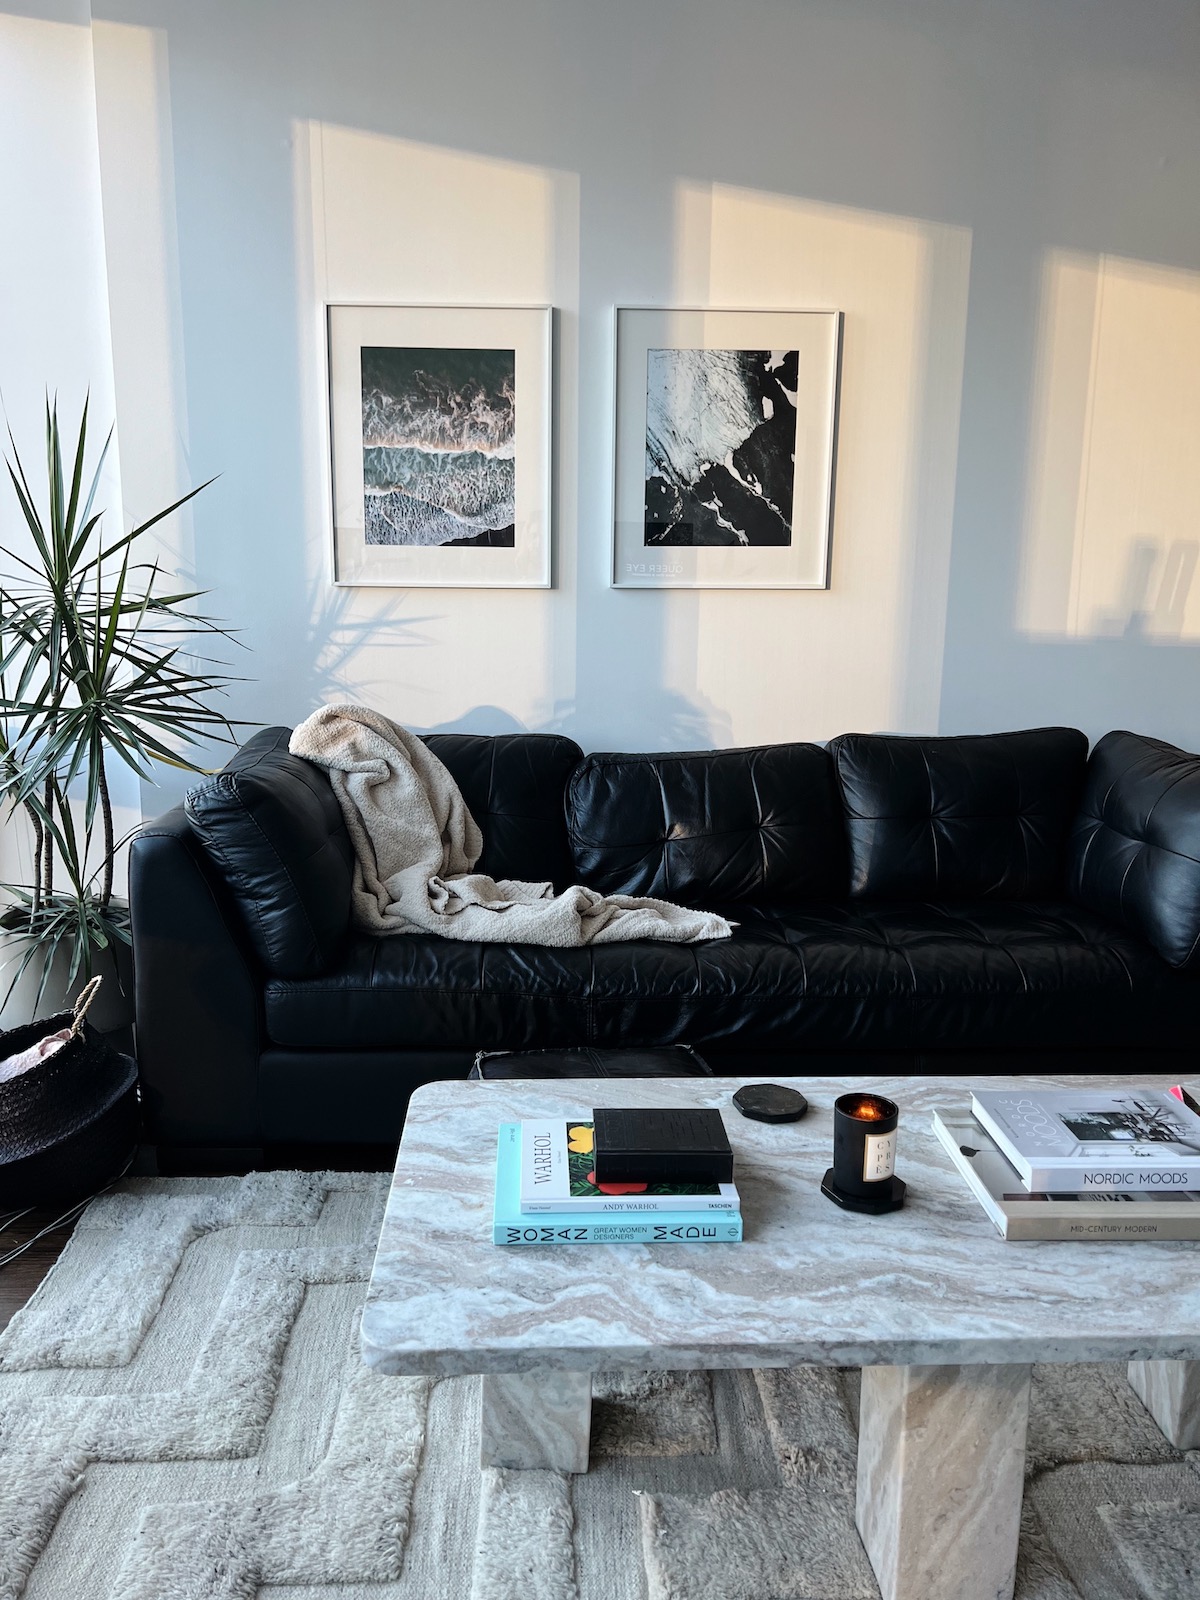 Two framed photos of the ocean by a leather couch and marbled coffee table.